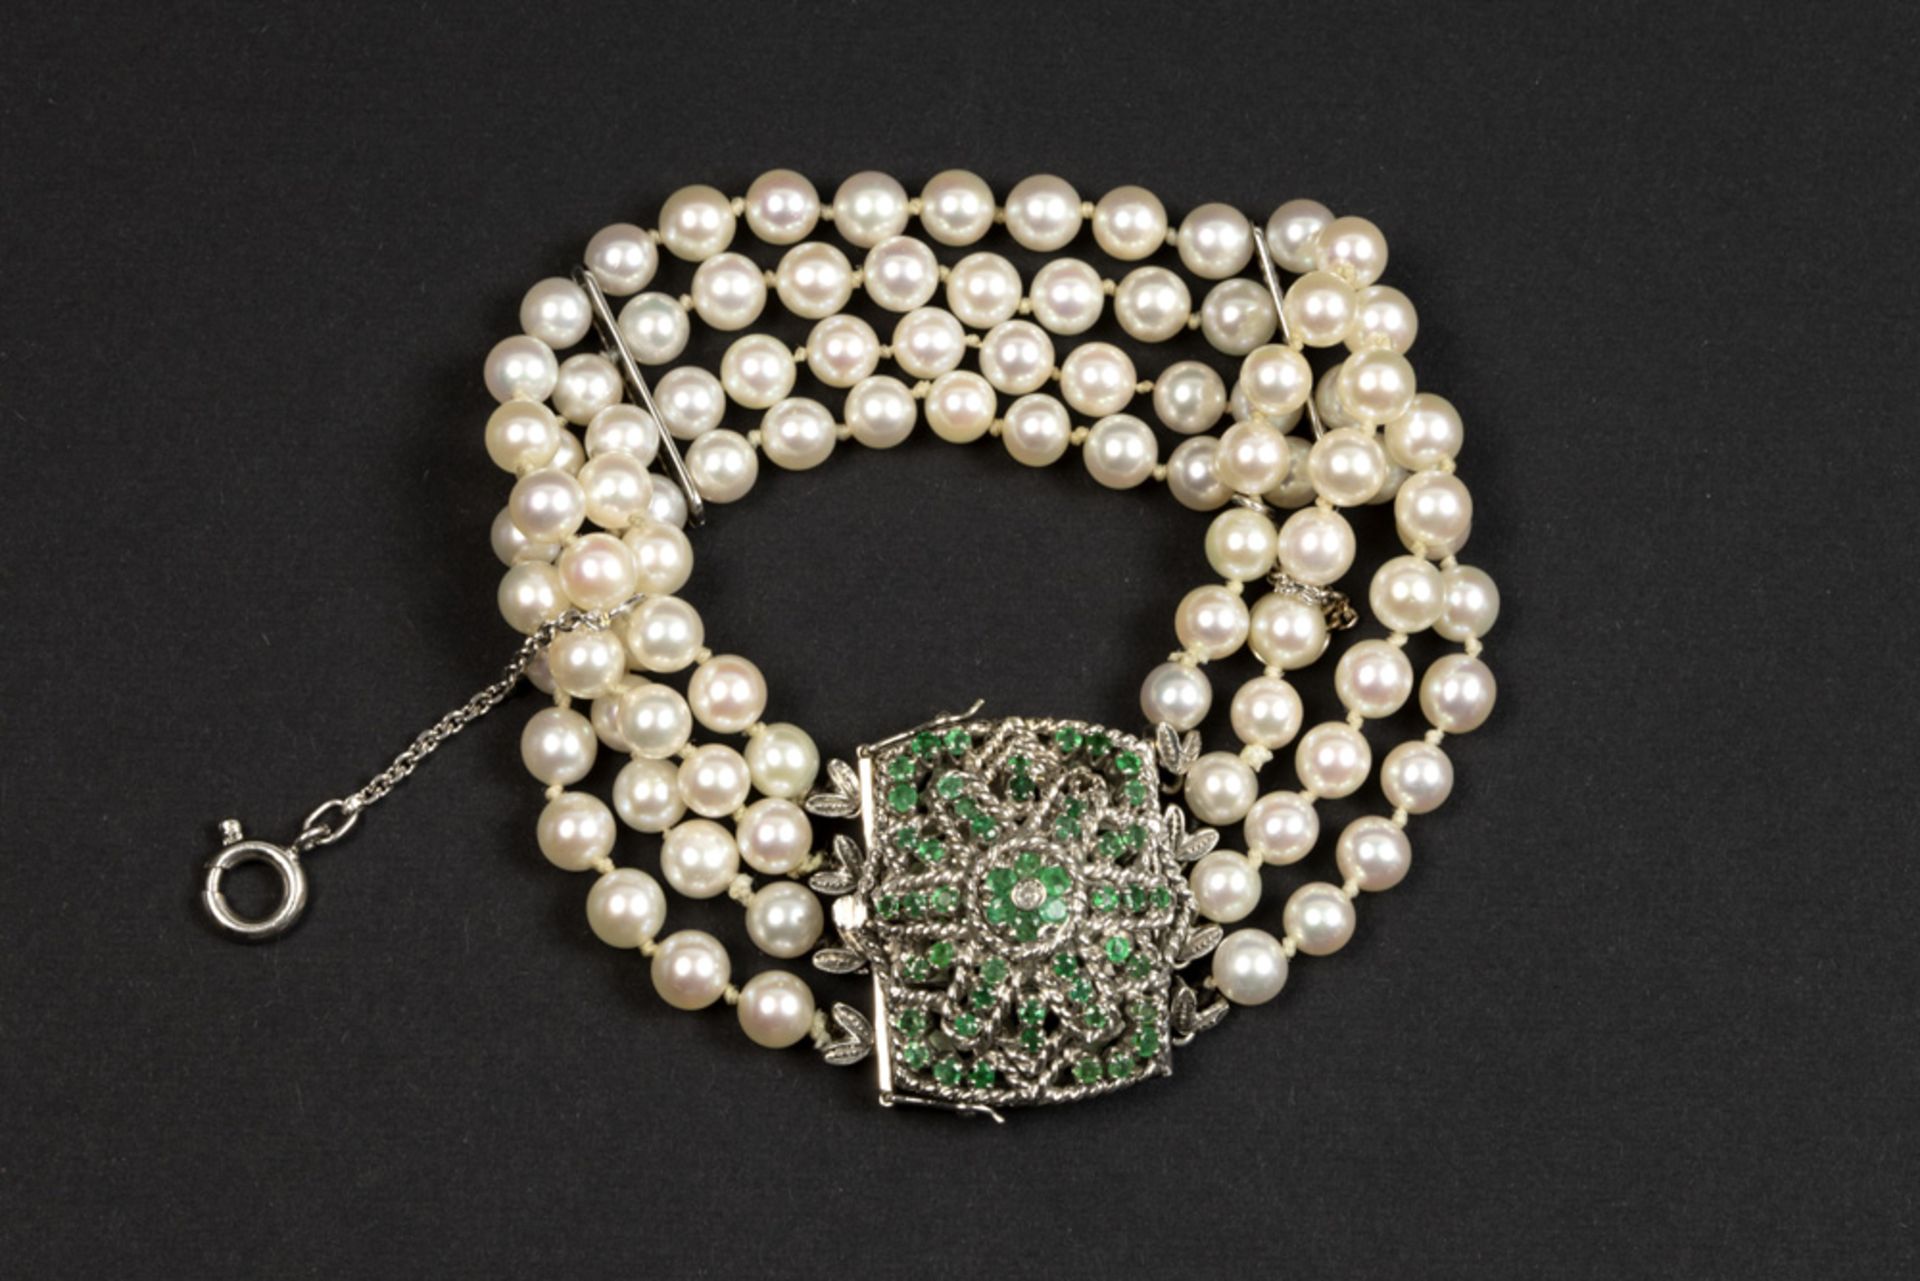 classy vintage bracelet with four rowes of white pearls, white gold (18 carat) and a beautiful